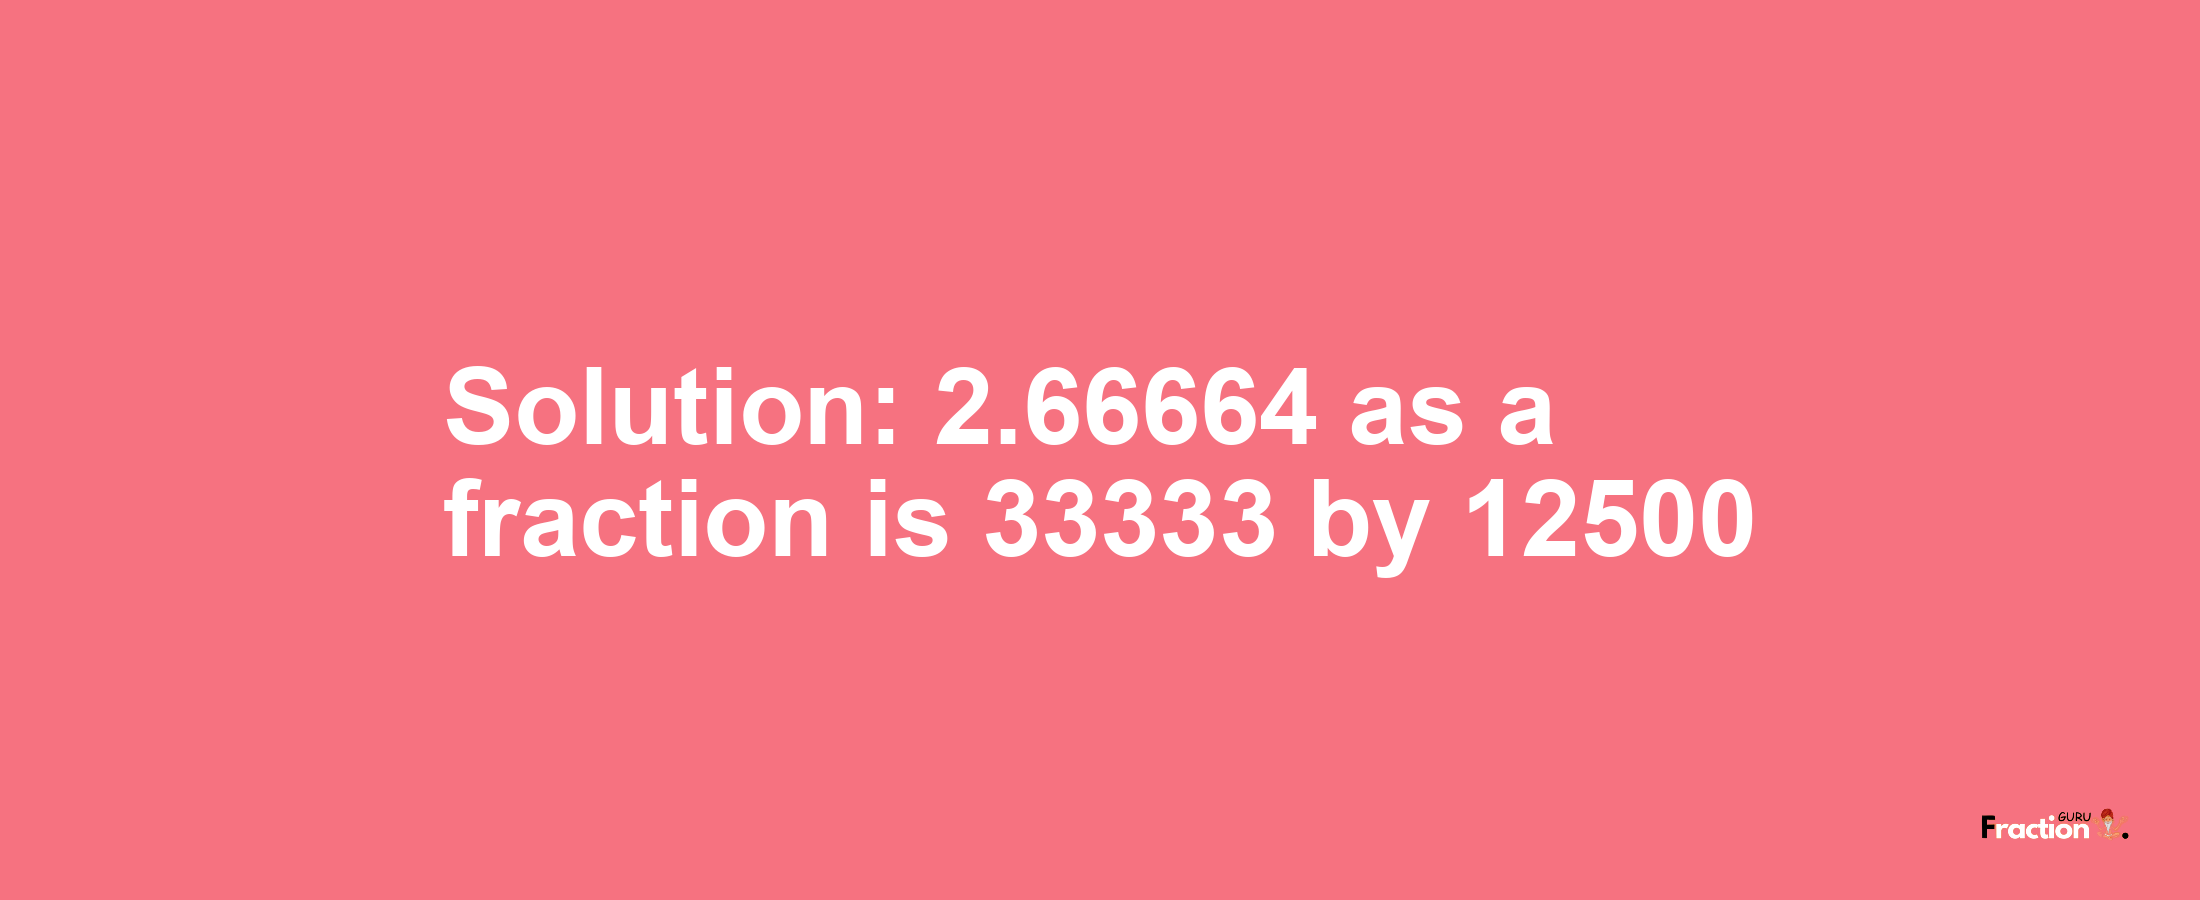 Solution:2.66664 as a fraction is 33333/12500